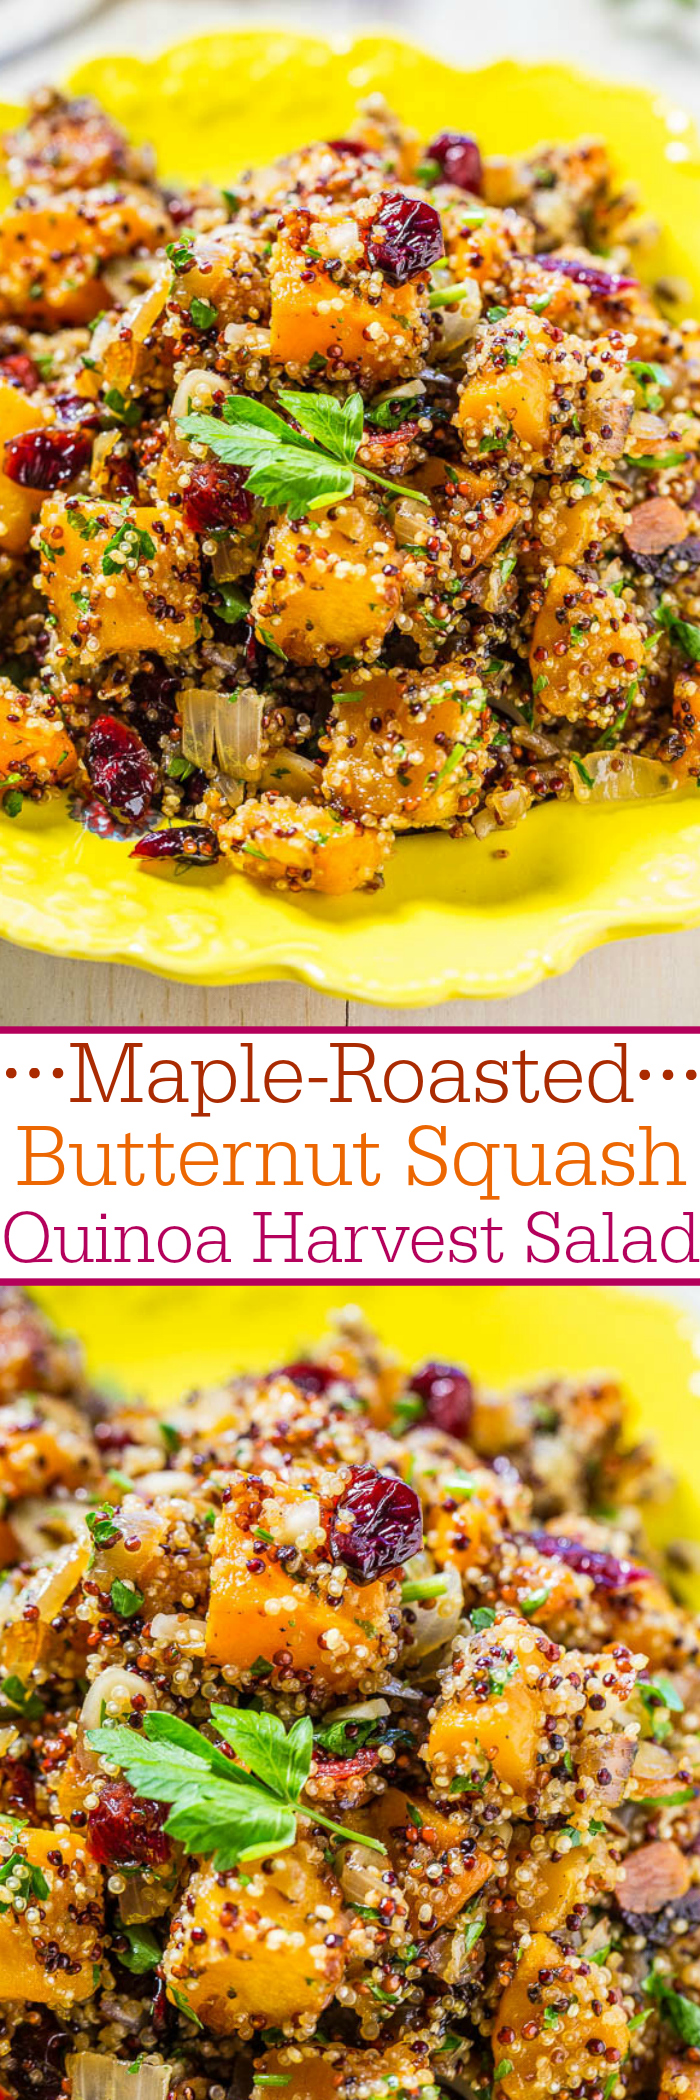 Butternut Squash Quinoa Salad — Easy and packed with big fall flavors!! Maple syrup, squash, and cranberries were made for each other! Love it when healthy tastes so good!!